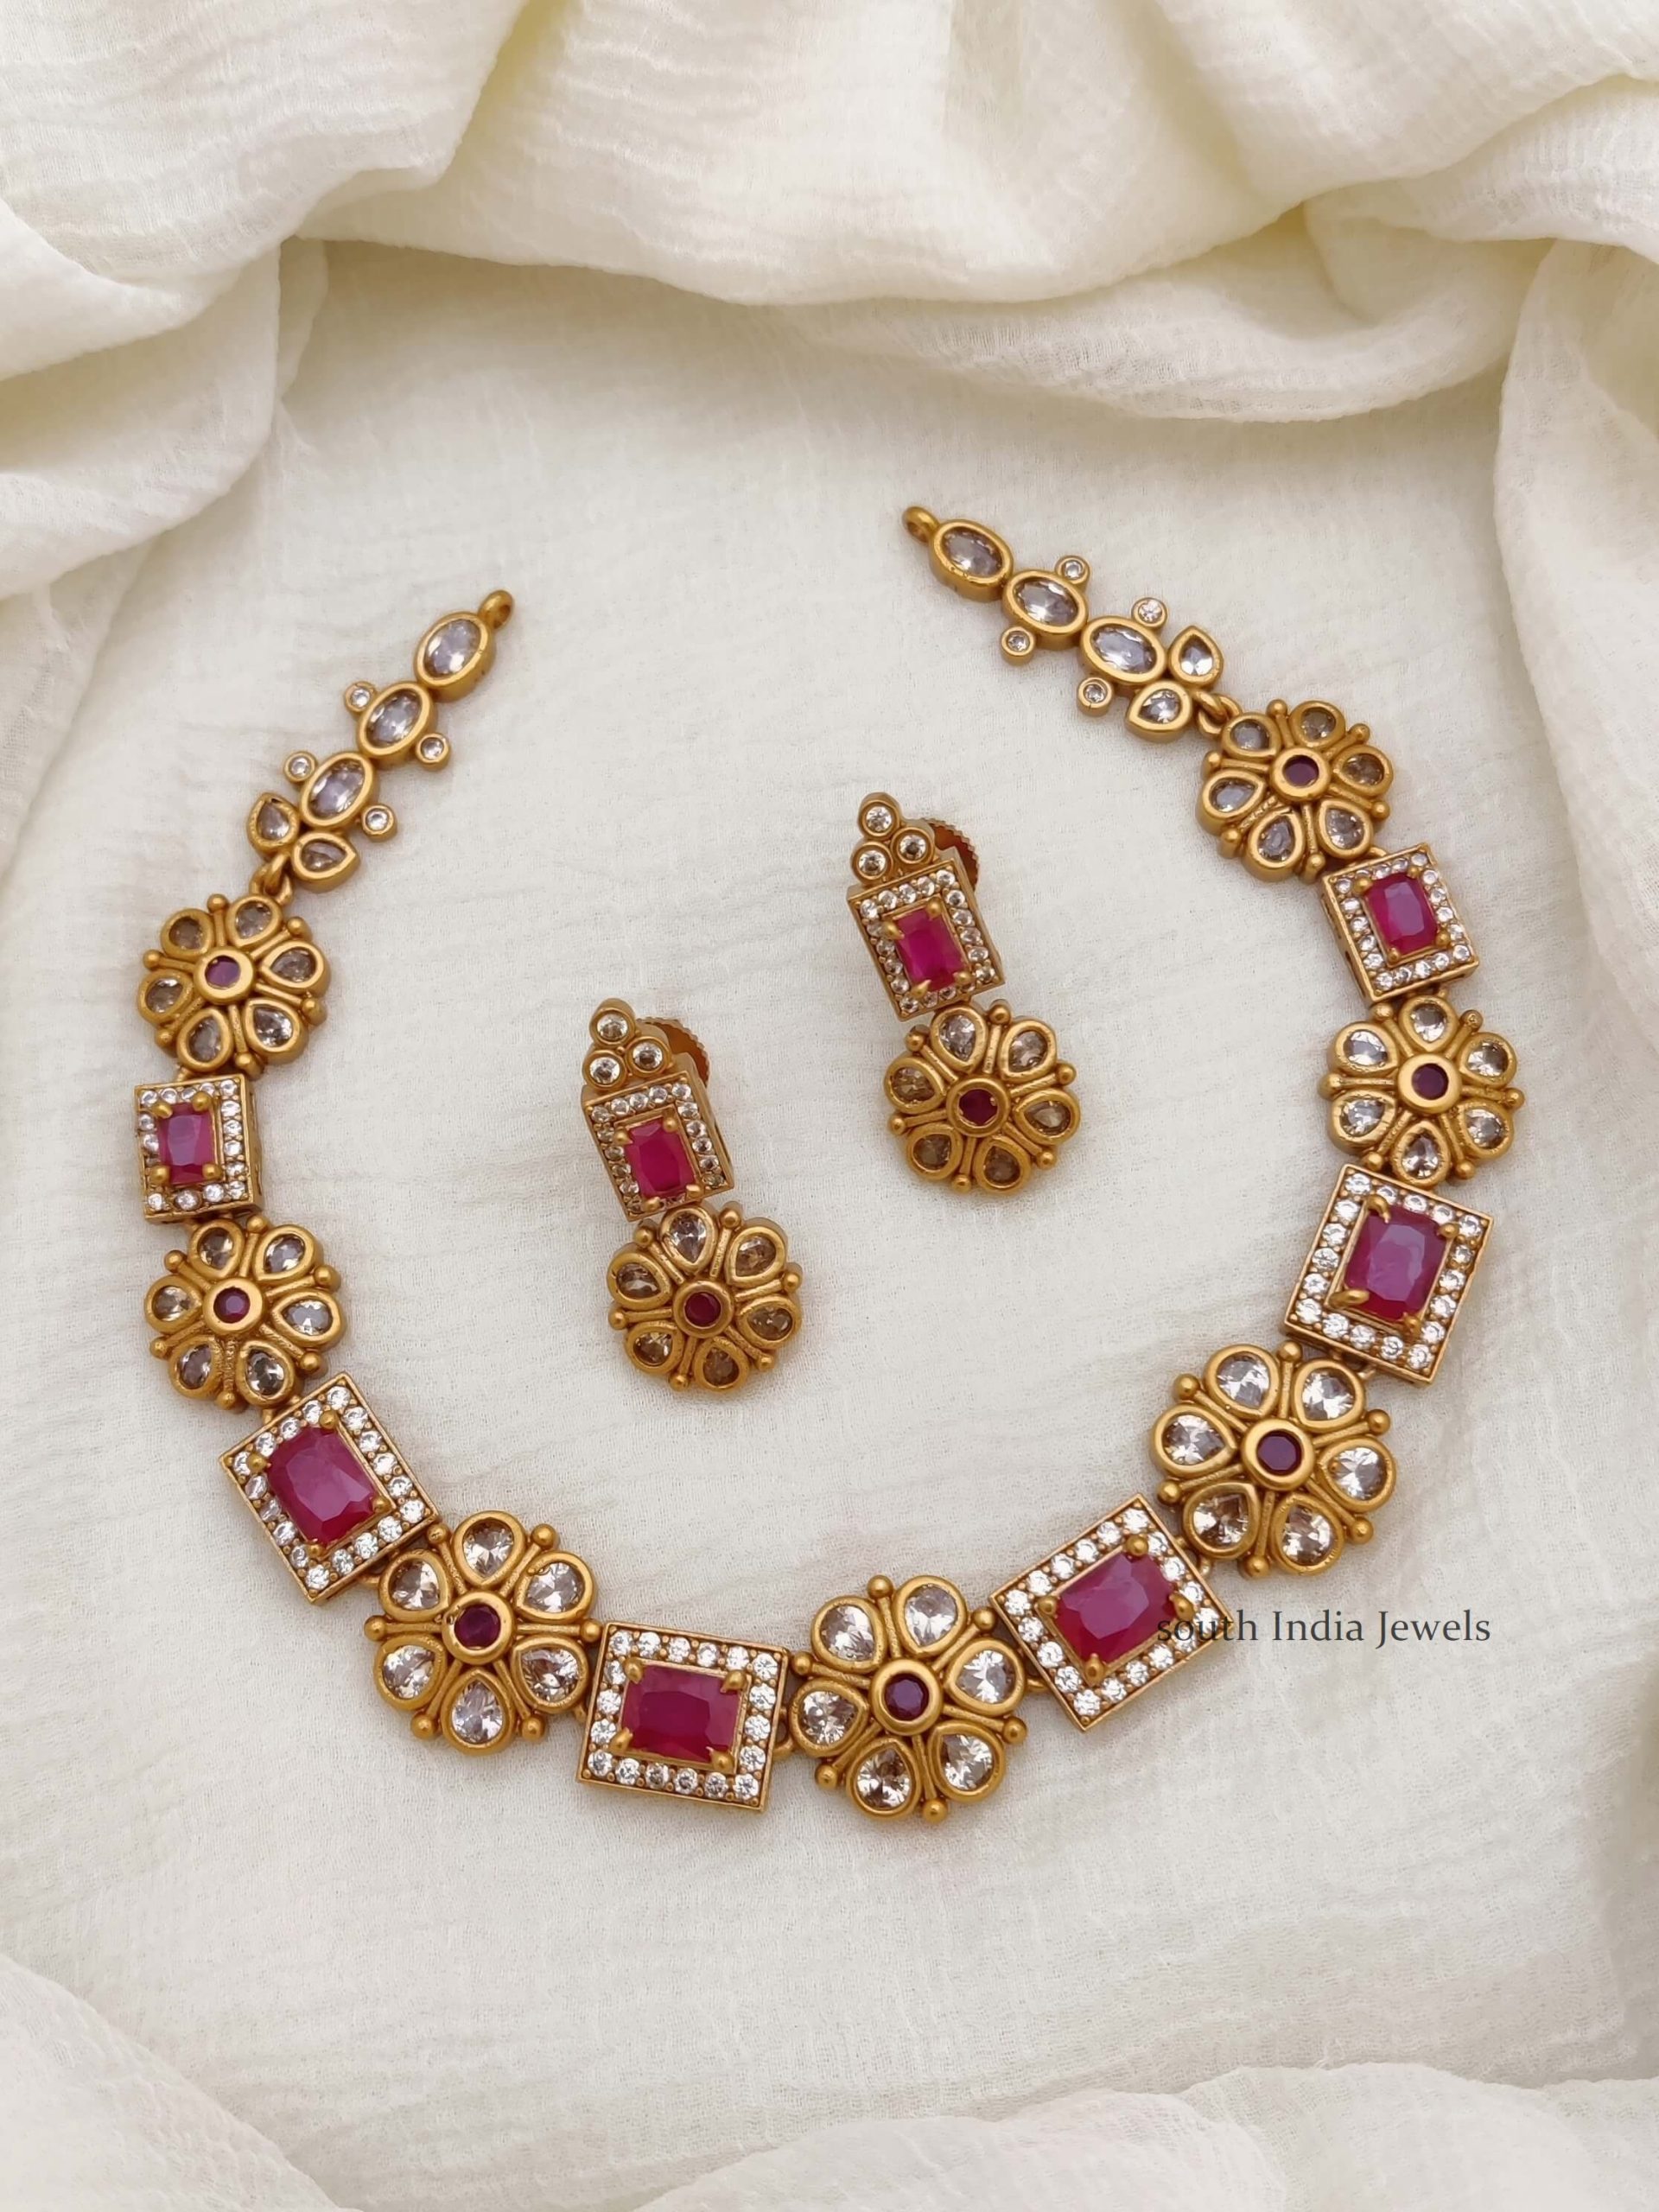 Imitation Gold Necklace | South Indian Bridal Jewellery Designs